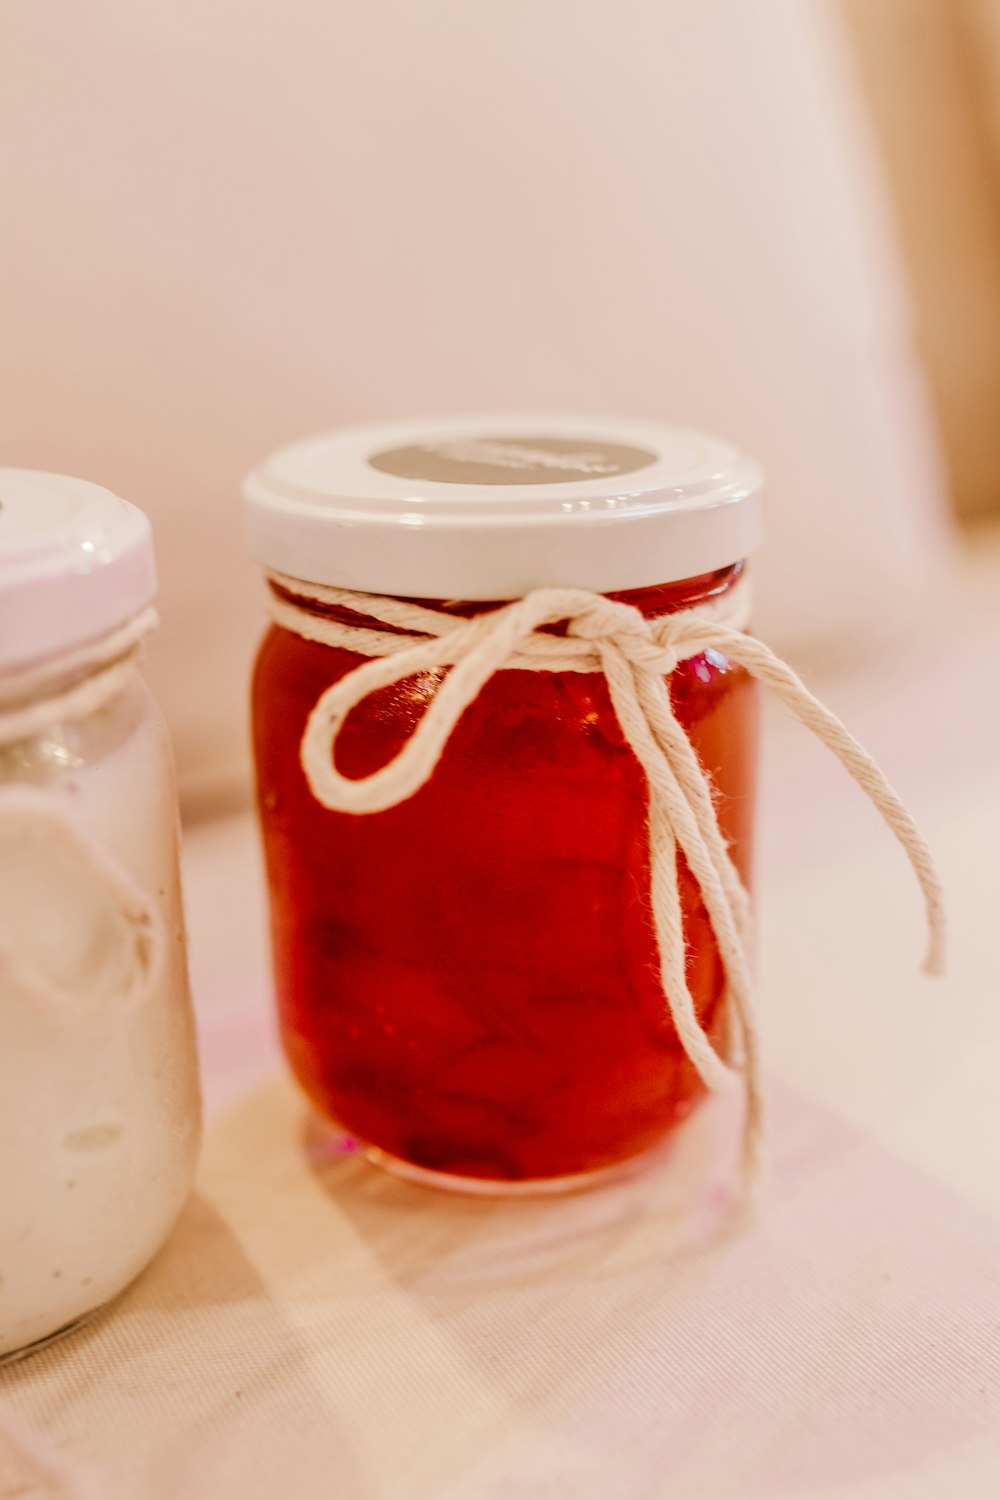 clear glass jar with red liquid